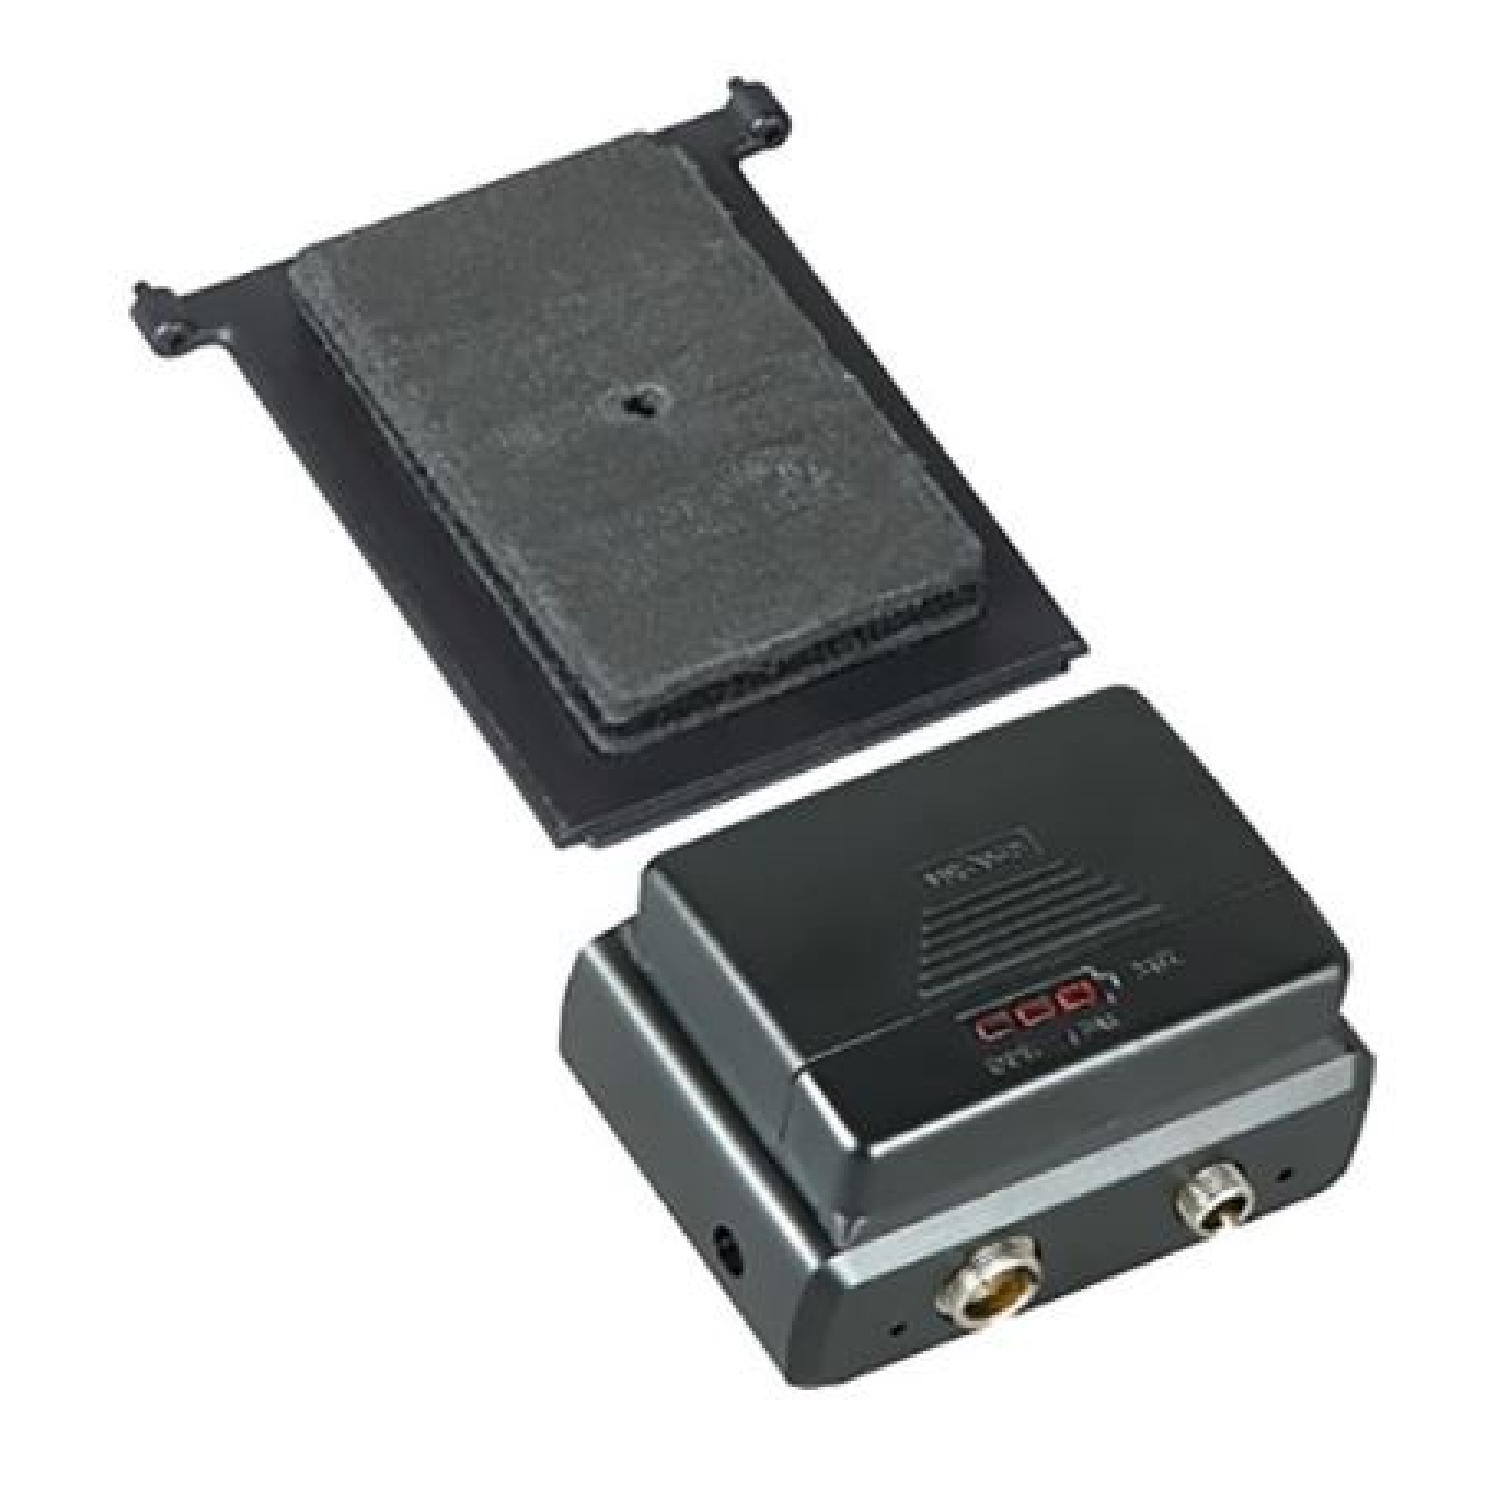 External Battery Pack Compartment for MR-90   MR 90SB mipro